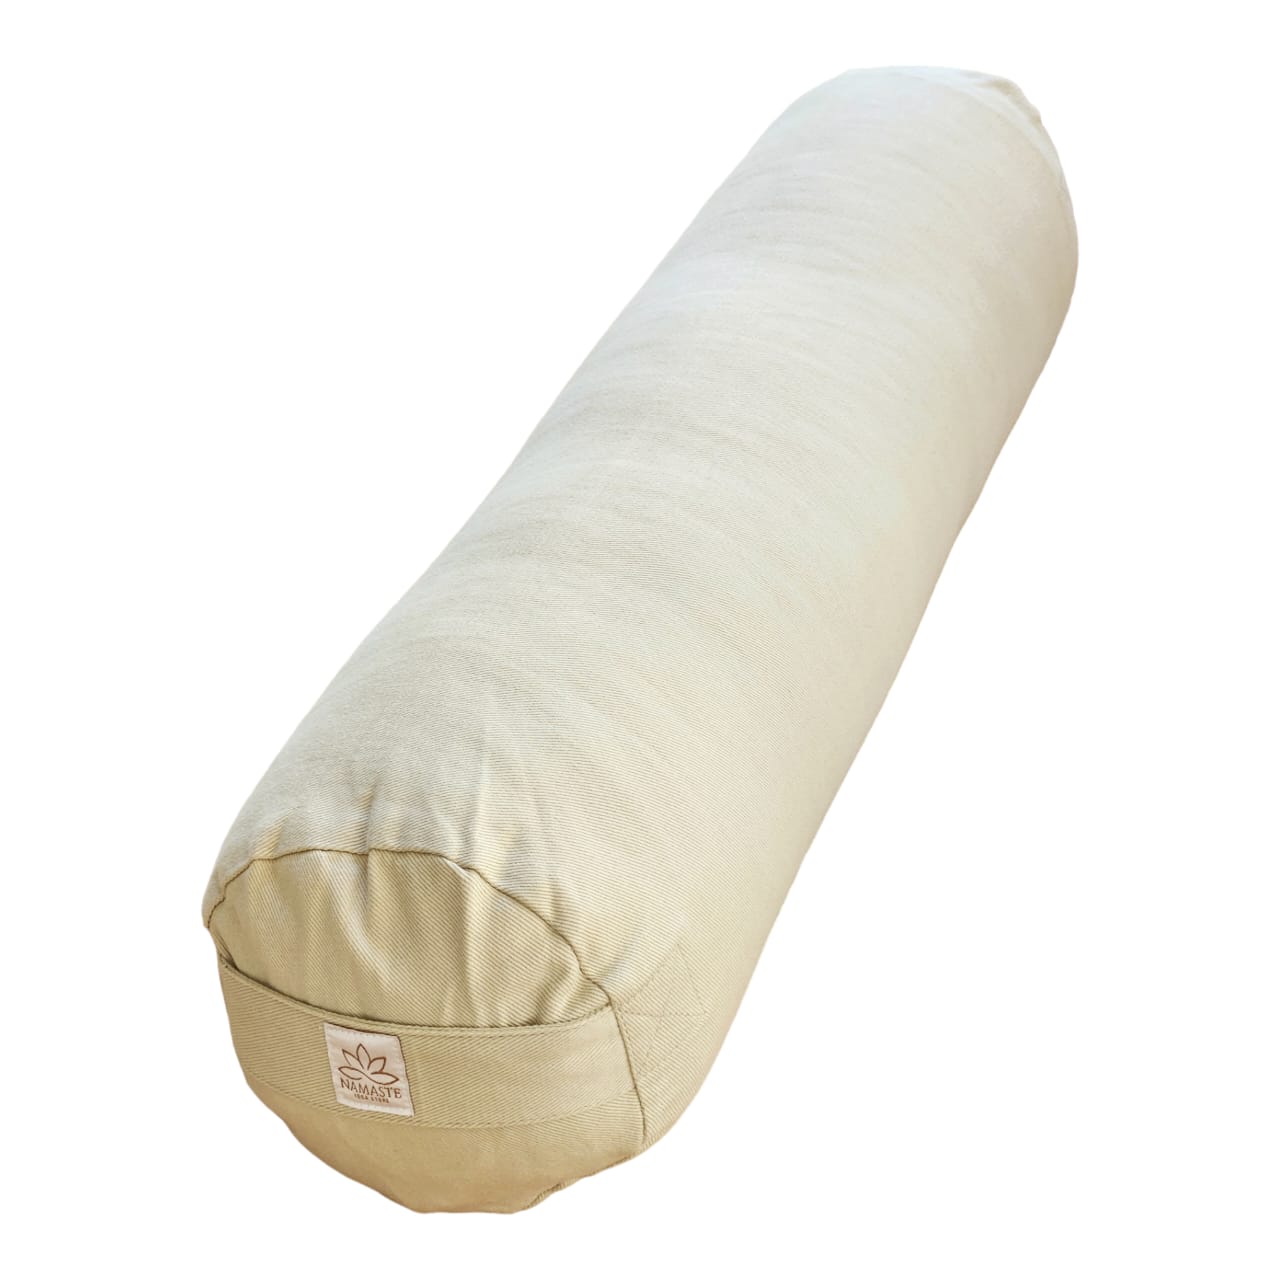 Bolster_Coussin de Yoga cylindre -Taupe